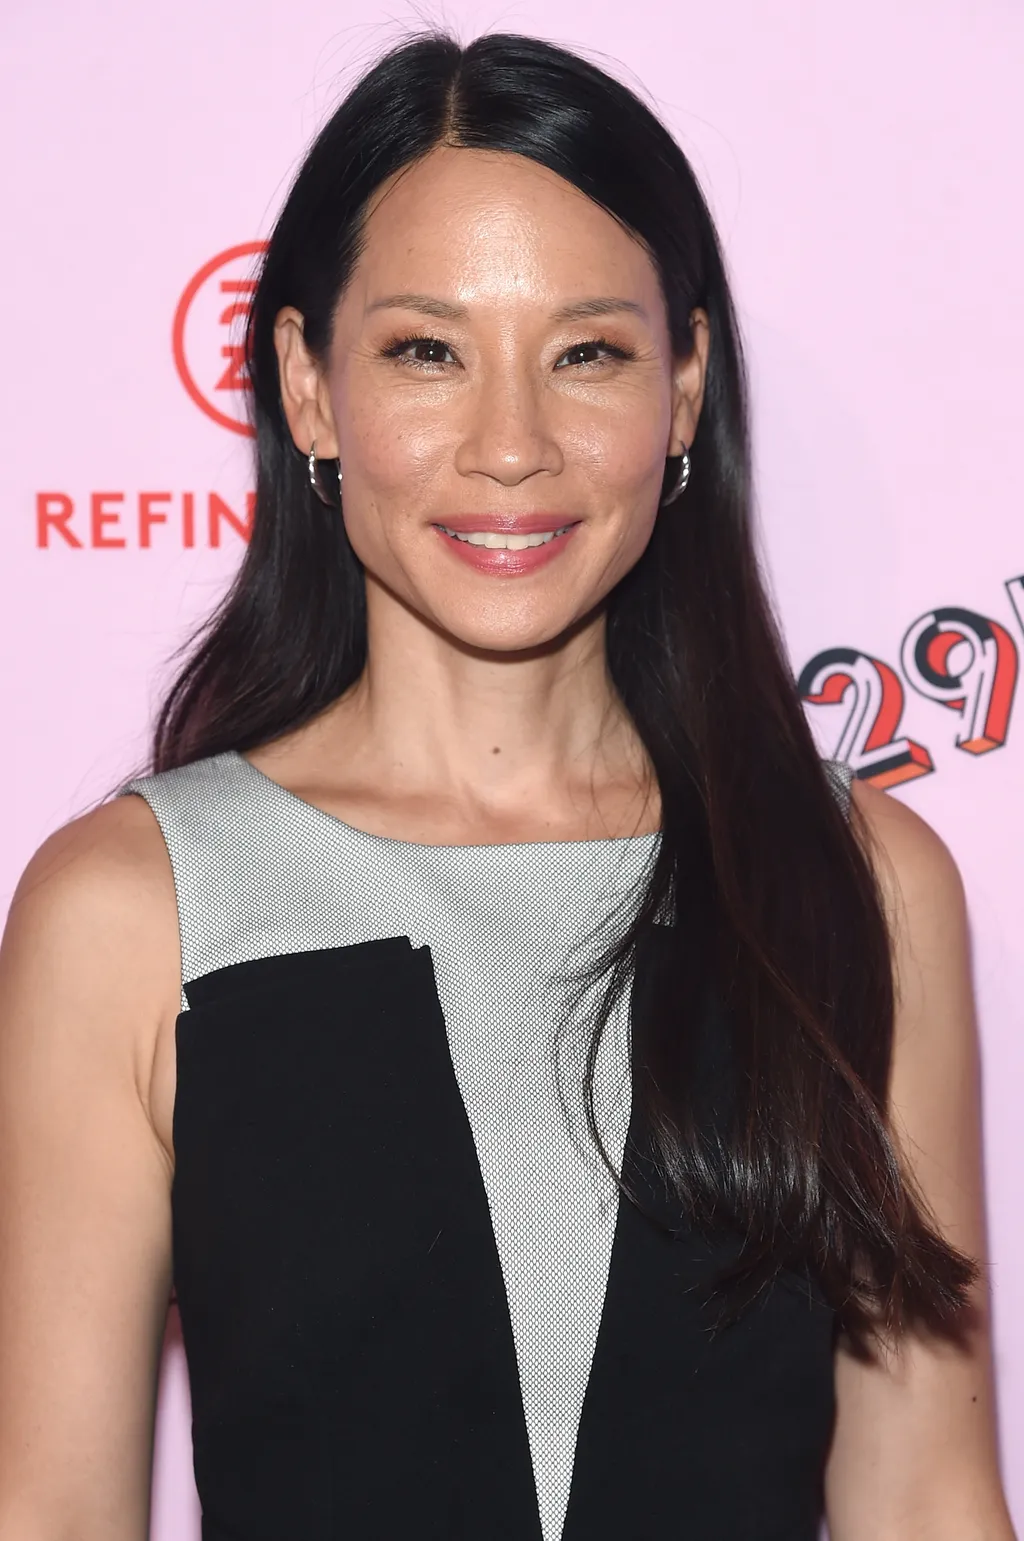 Refinery29 Third Annual 29Rooms: Turn It Into Art GettyImageRank2 Third Turn EVENT VERTICAL USA New York City Brooklyn - New York Photography Lucy Liu Arts Culture and Entertainment Attending Annual Event New York City City ACTRESS A-List Celebrity Boroug